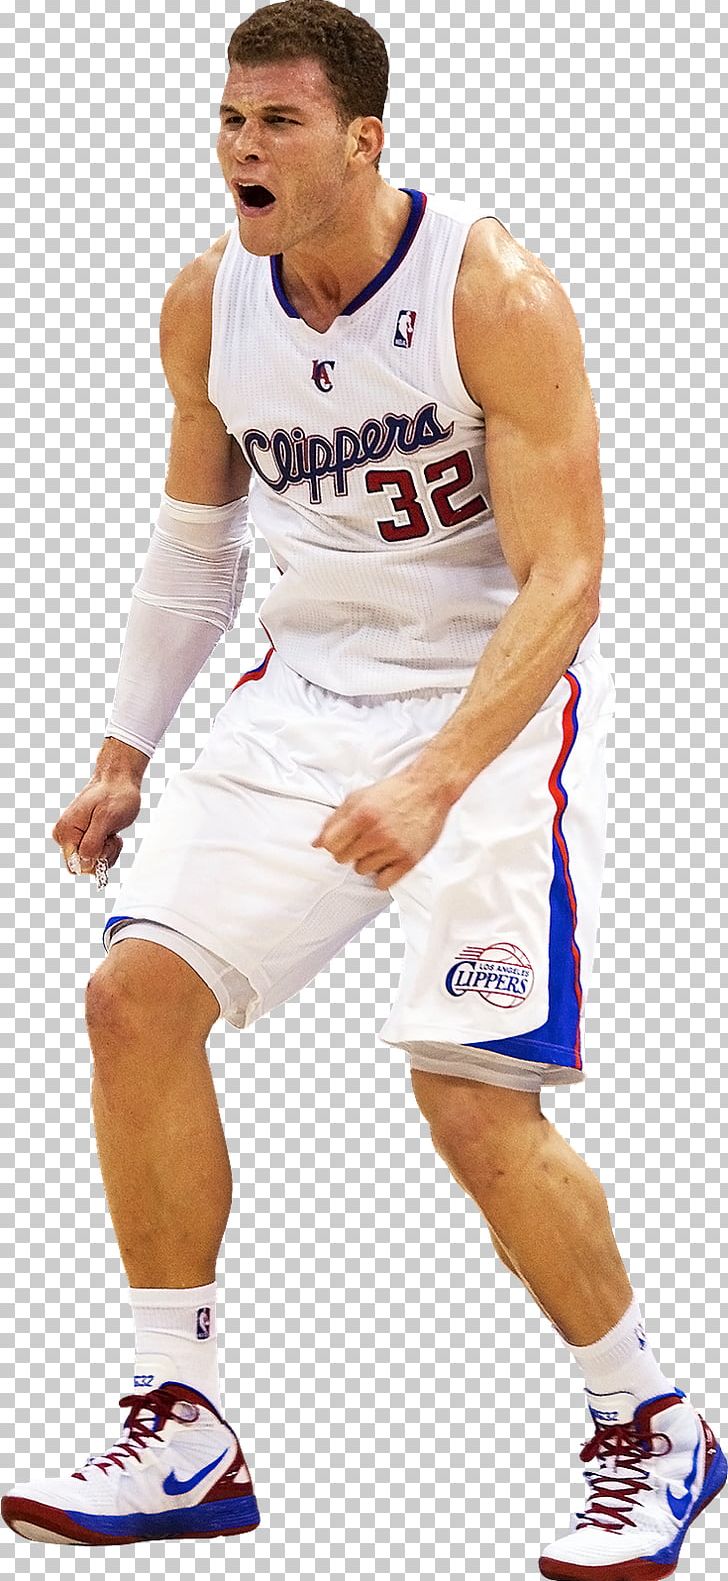 Blake Griffin Los Angeles Clippers Basketball Player Athlete PNG, Clipart, Arm, Basketball Player, Championship, Eric Bledsoe, Fantasy Free PNG Download